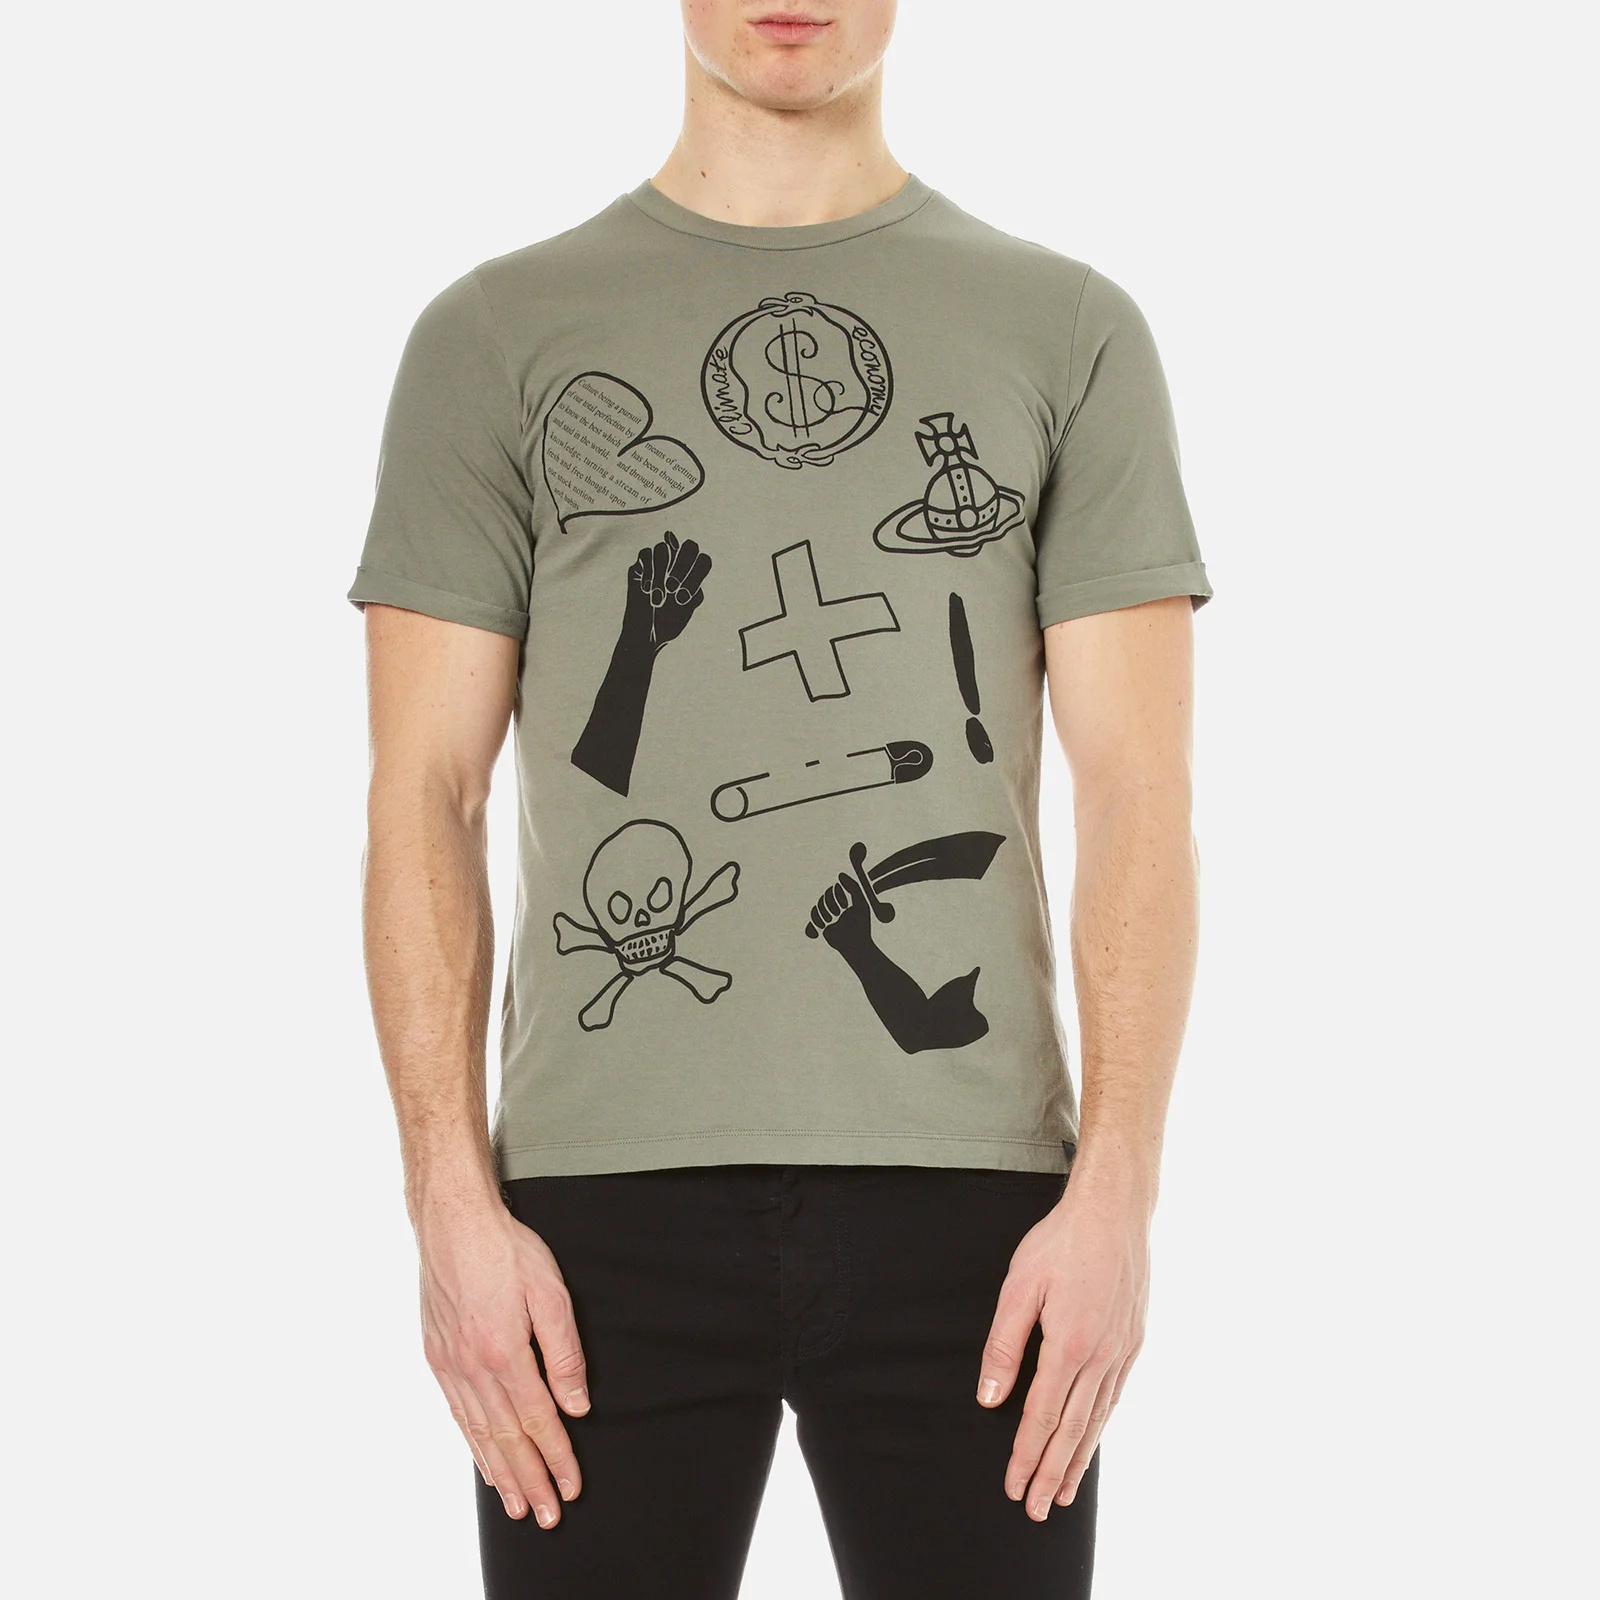 Vivienne Westwood Anglomania Men's Classic T-Shirt - Military Green Image 1